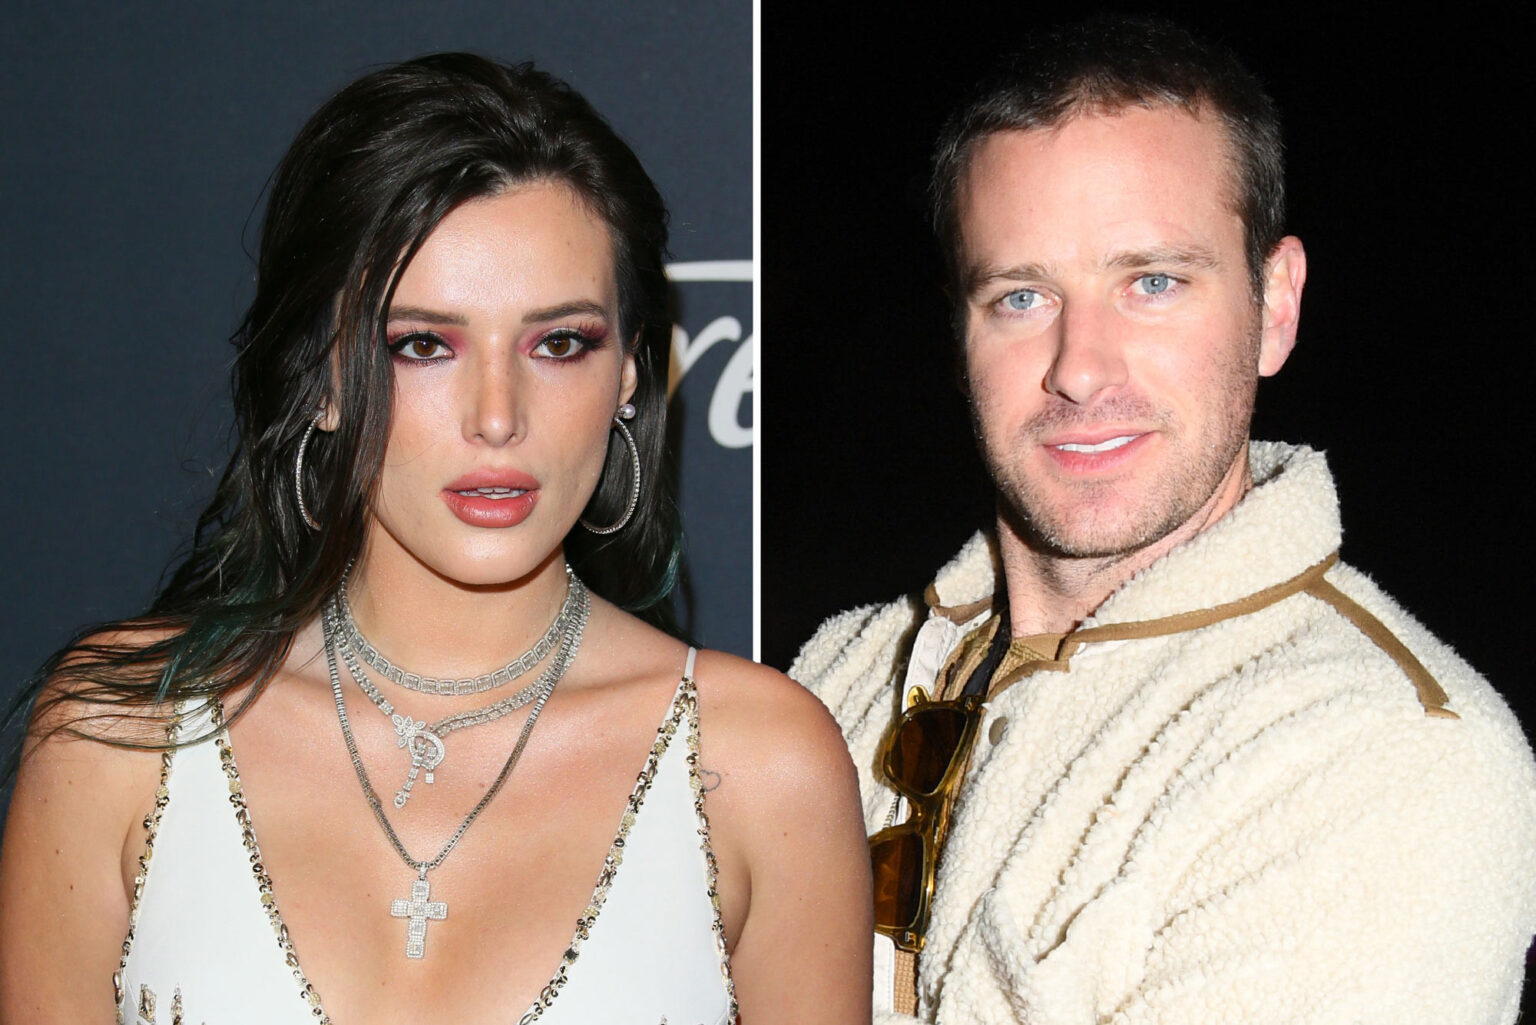 The allegations against Armie Hammer have social media ablaze, but Bella Thorne doesn't think they're real. See her statement from Instagram.